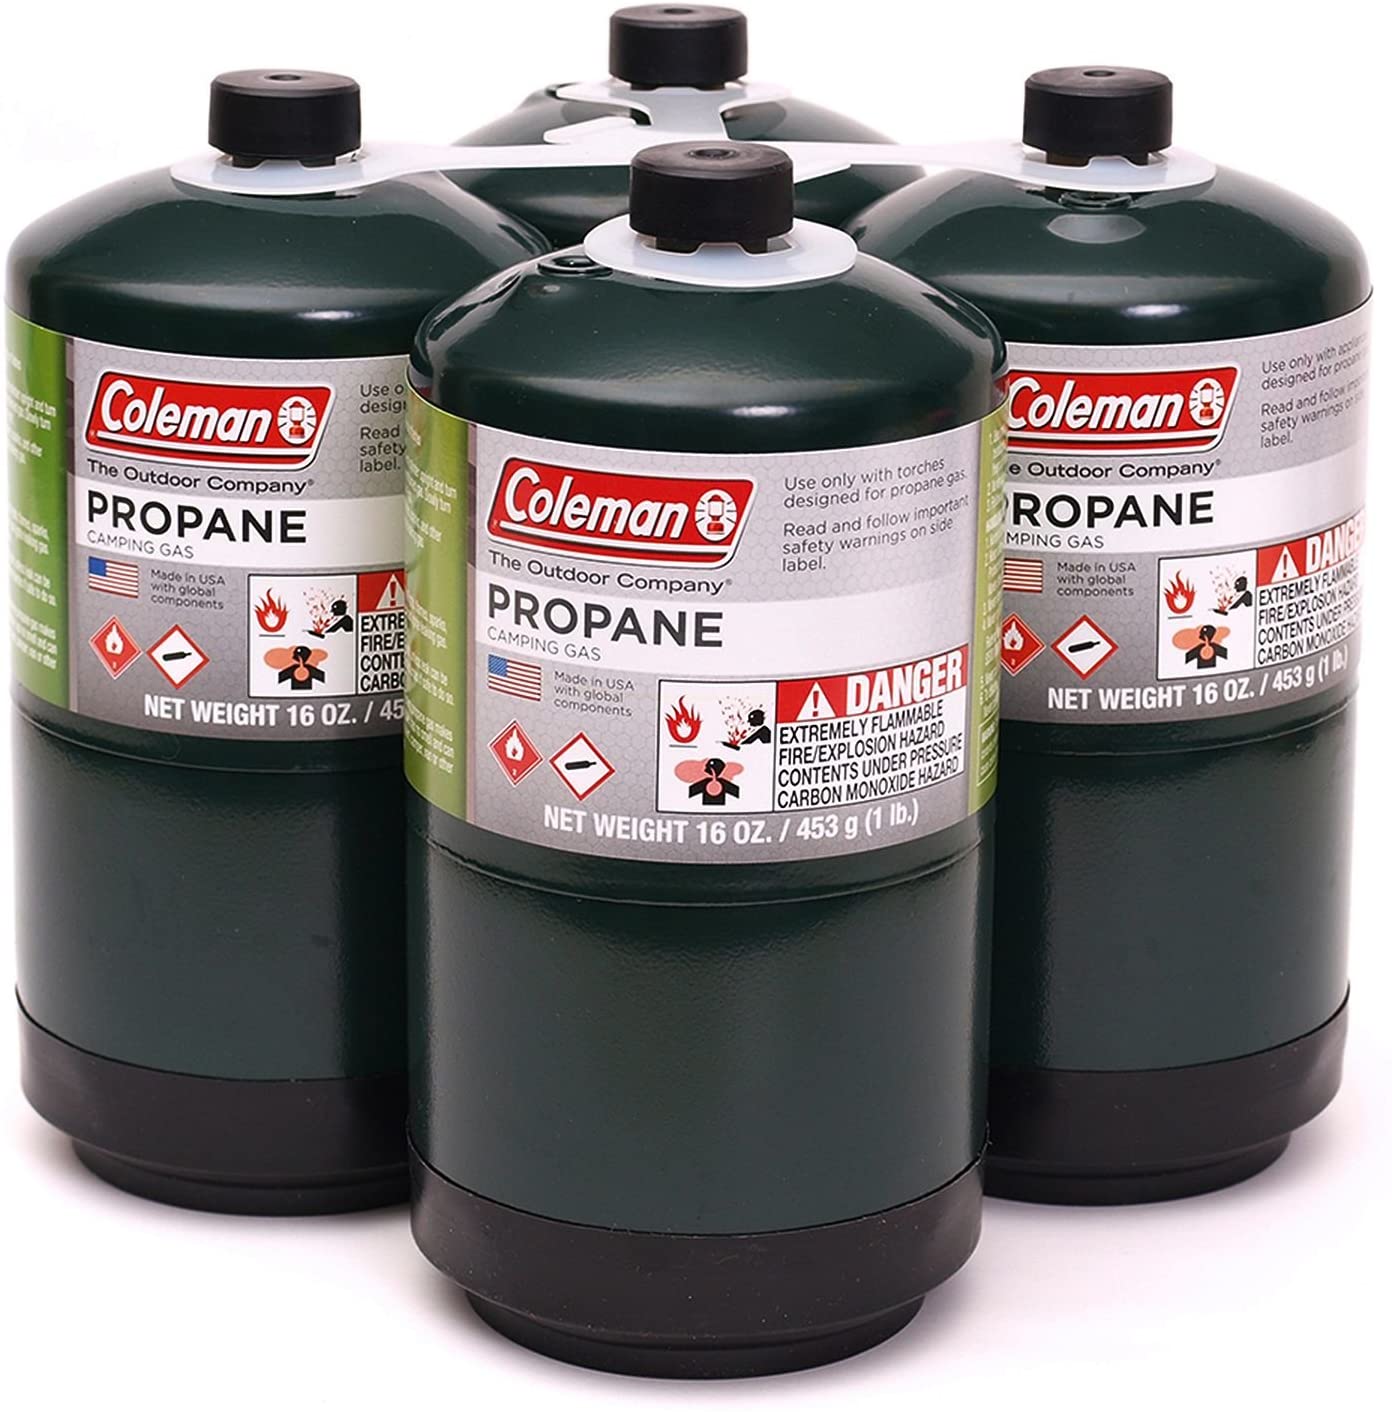 Coleman Lightweight Clean-Burning Small Propane Tanks, 4-Pack